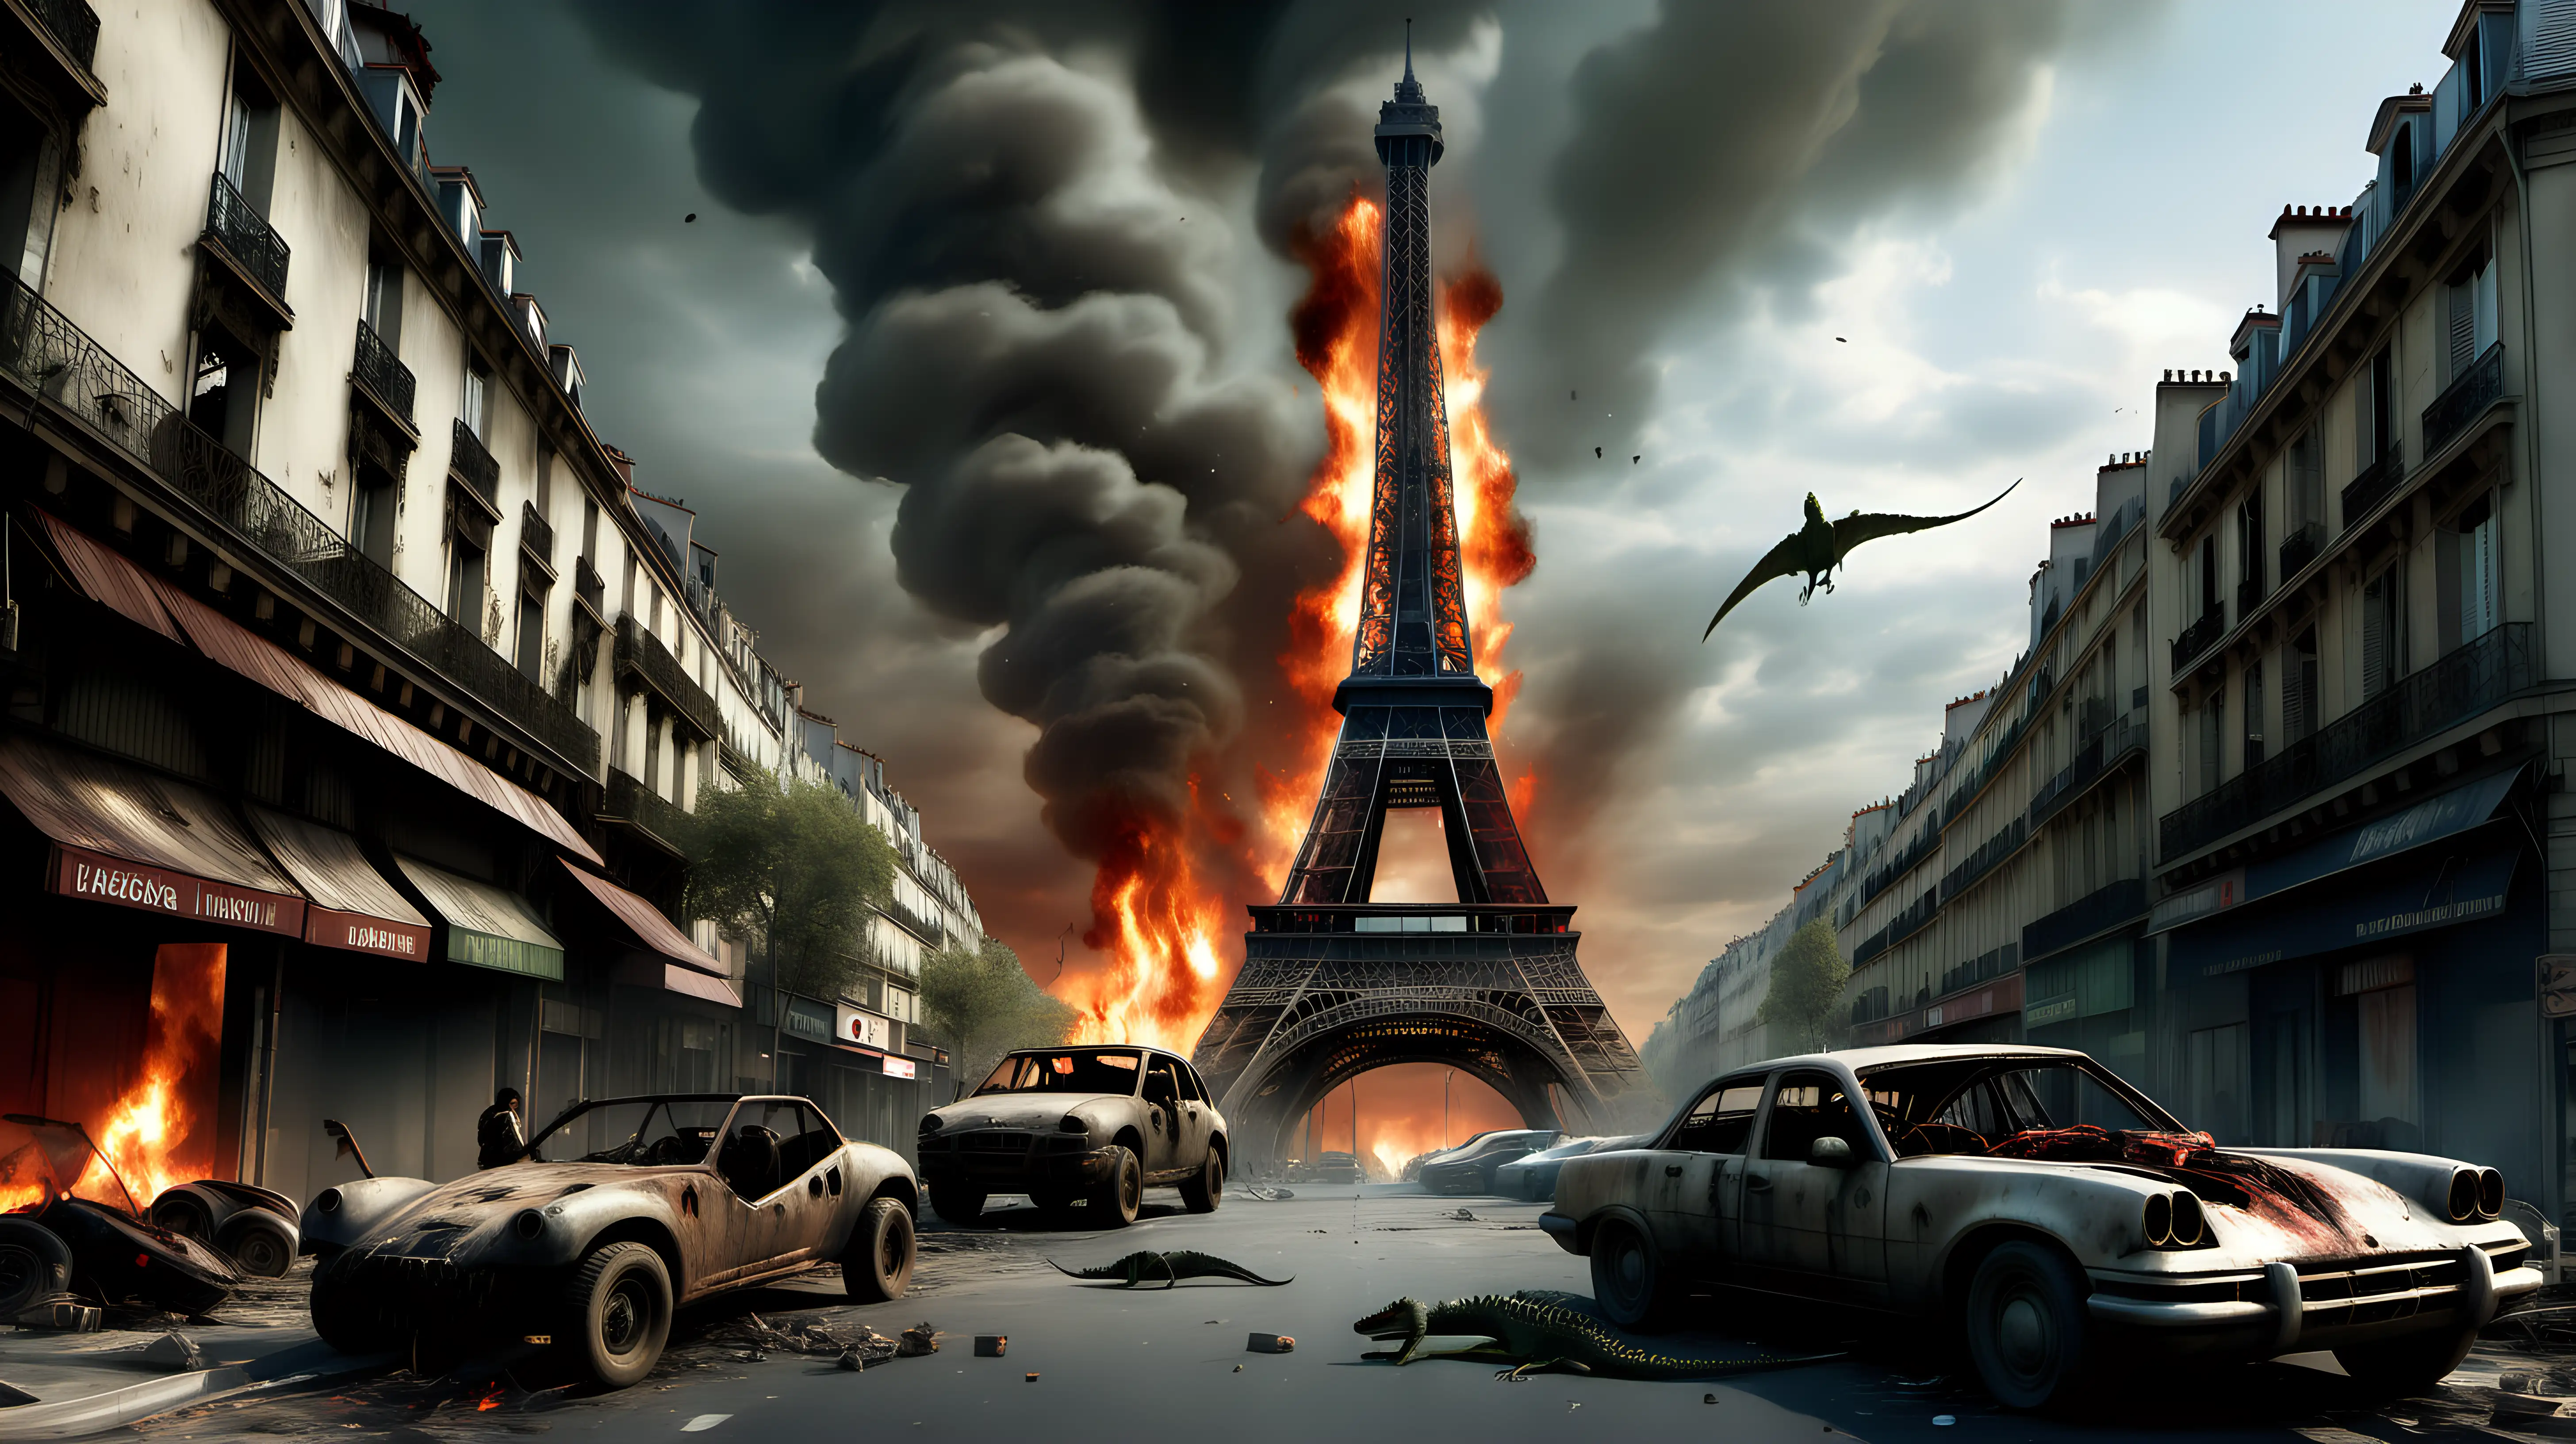 Eiffel Tower in a post-apocalyptic setting with fire, damaged cars, and a crocodile in the street ::